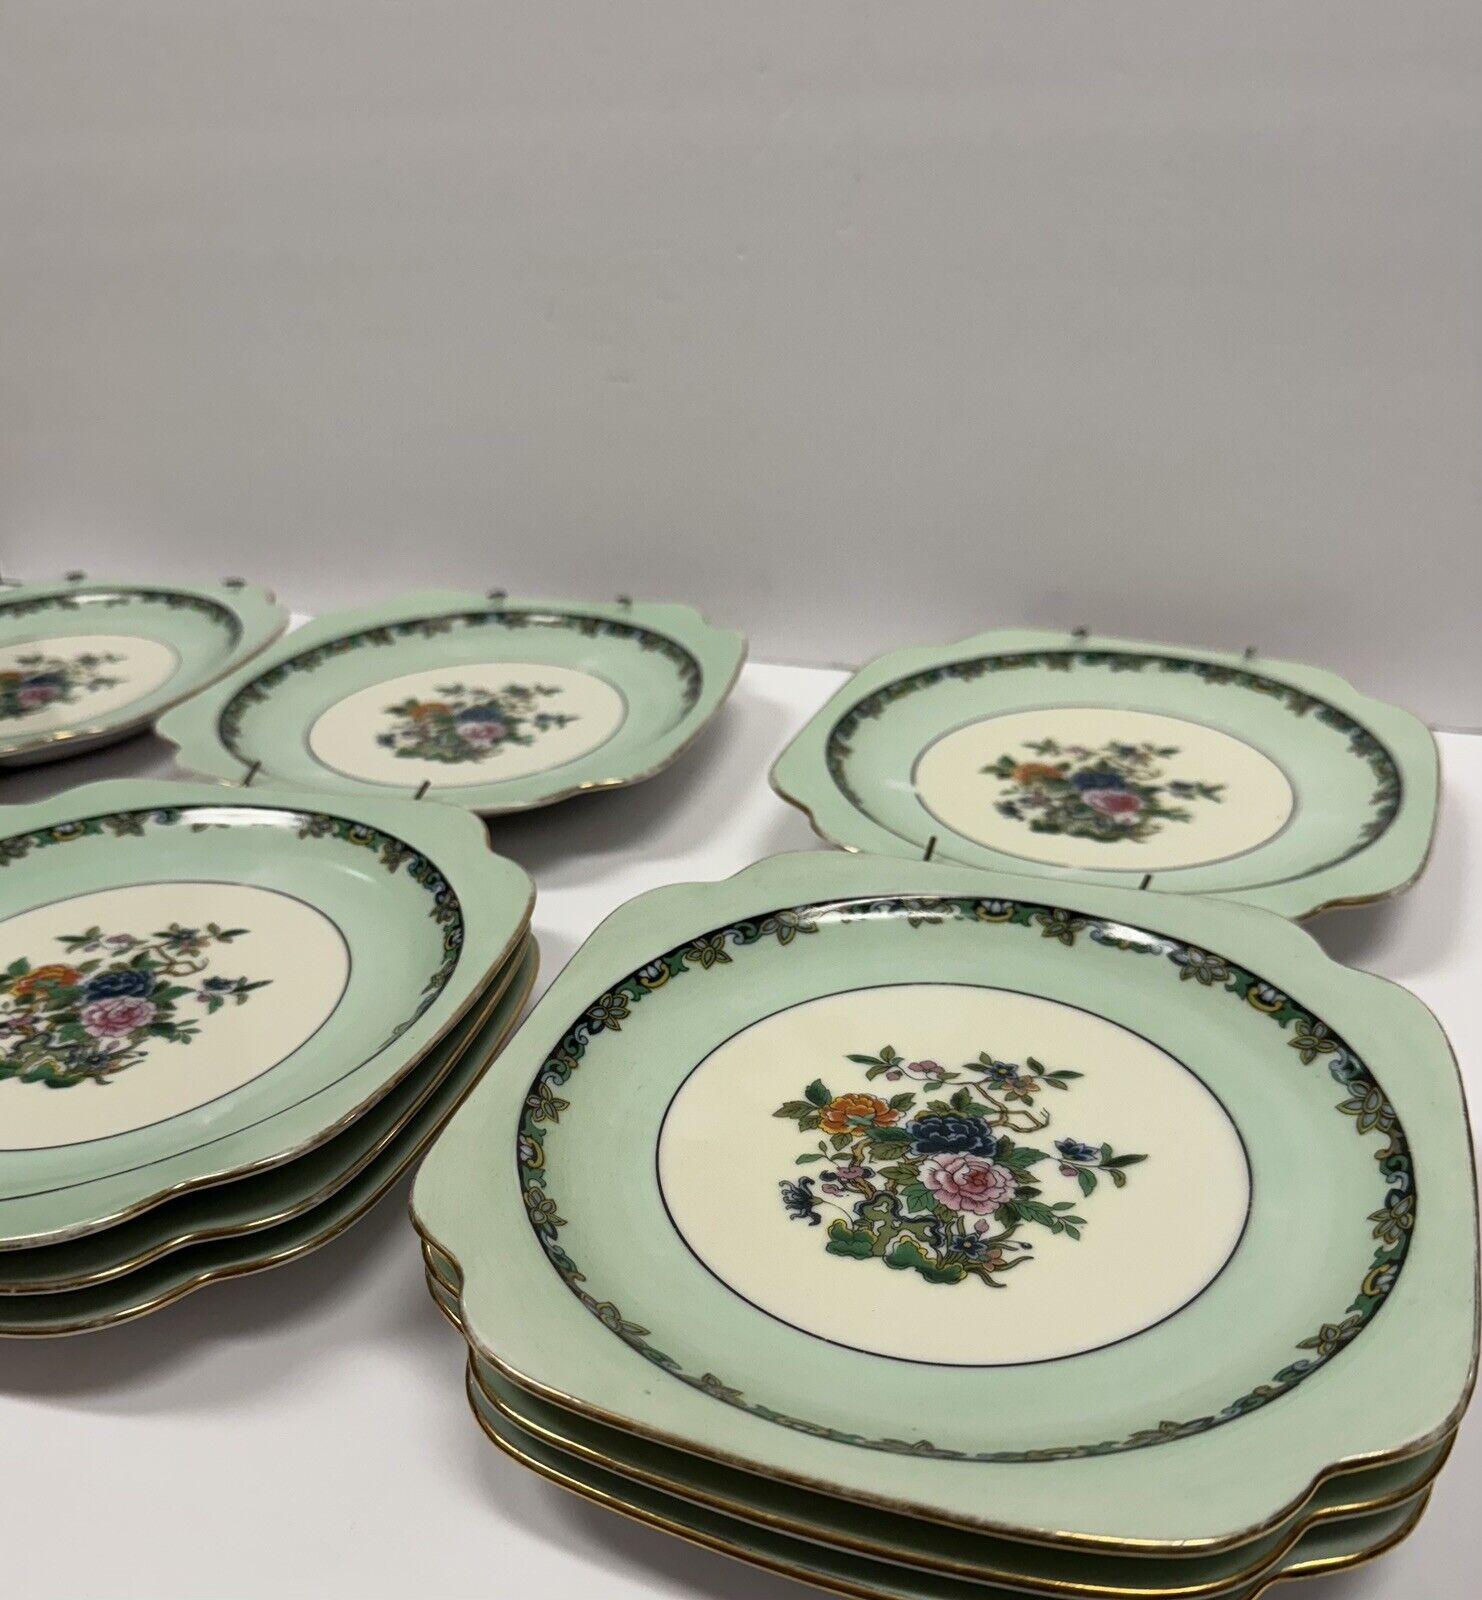 Vintage Royal China Decorative Plate Set Of 10 With 4 Plate Hangers Included